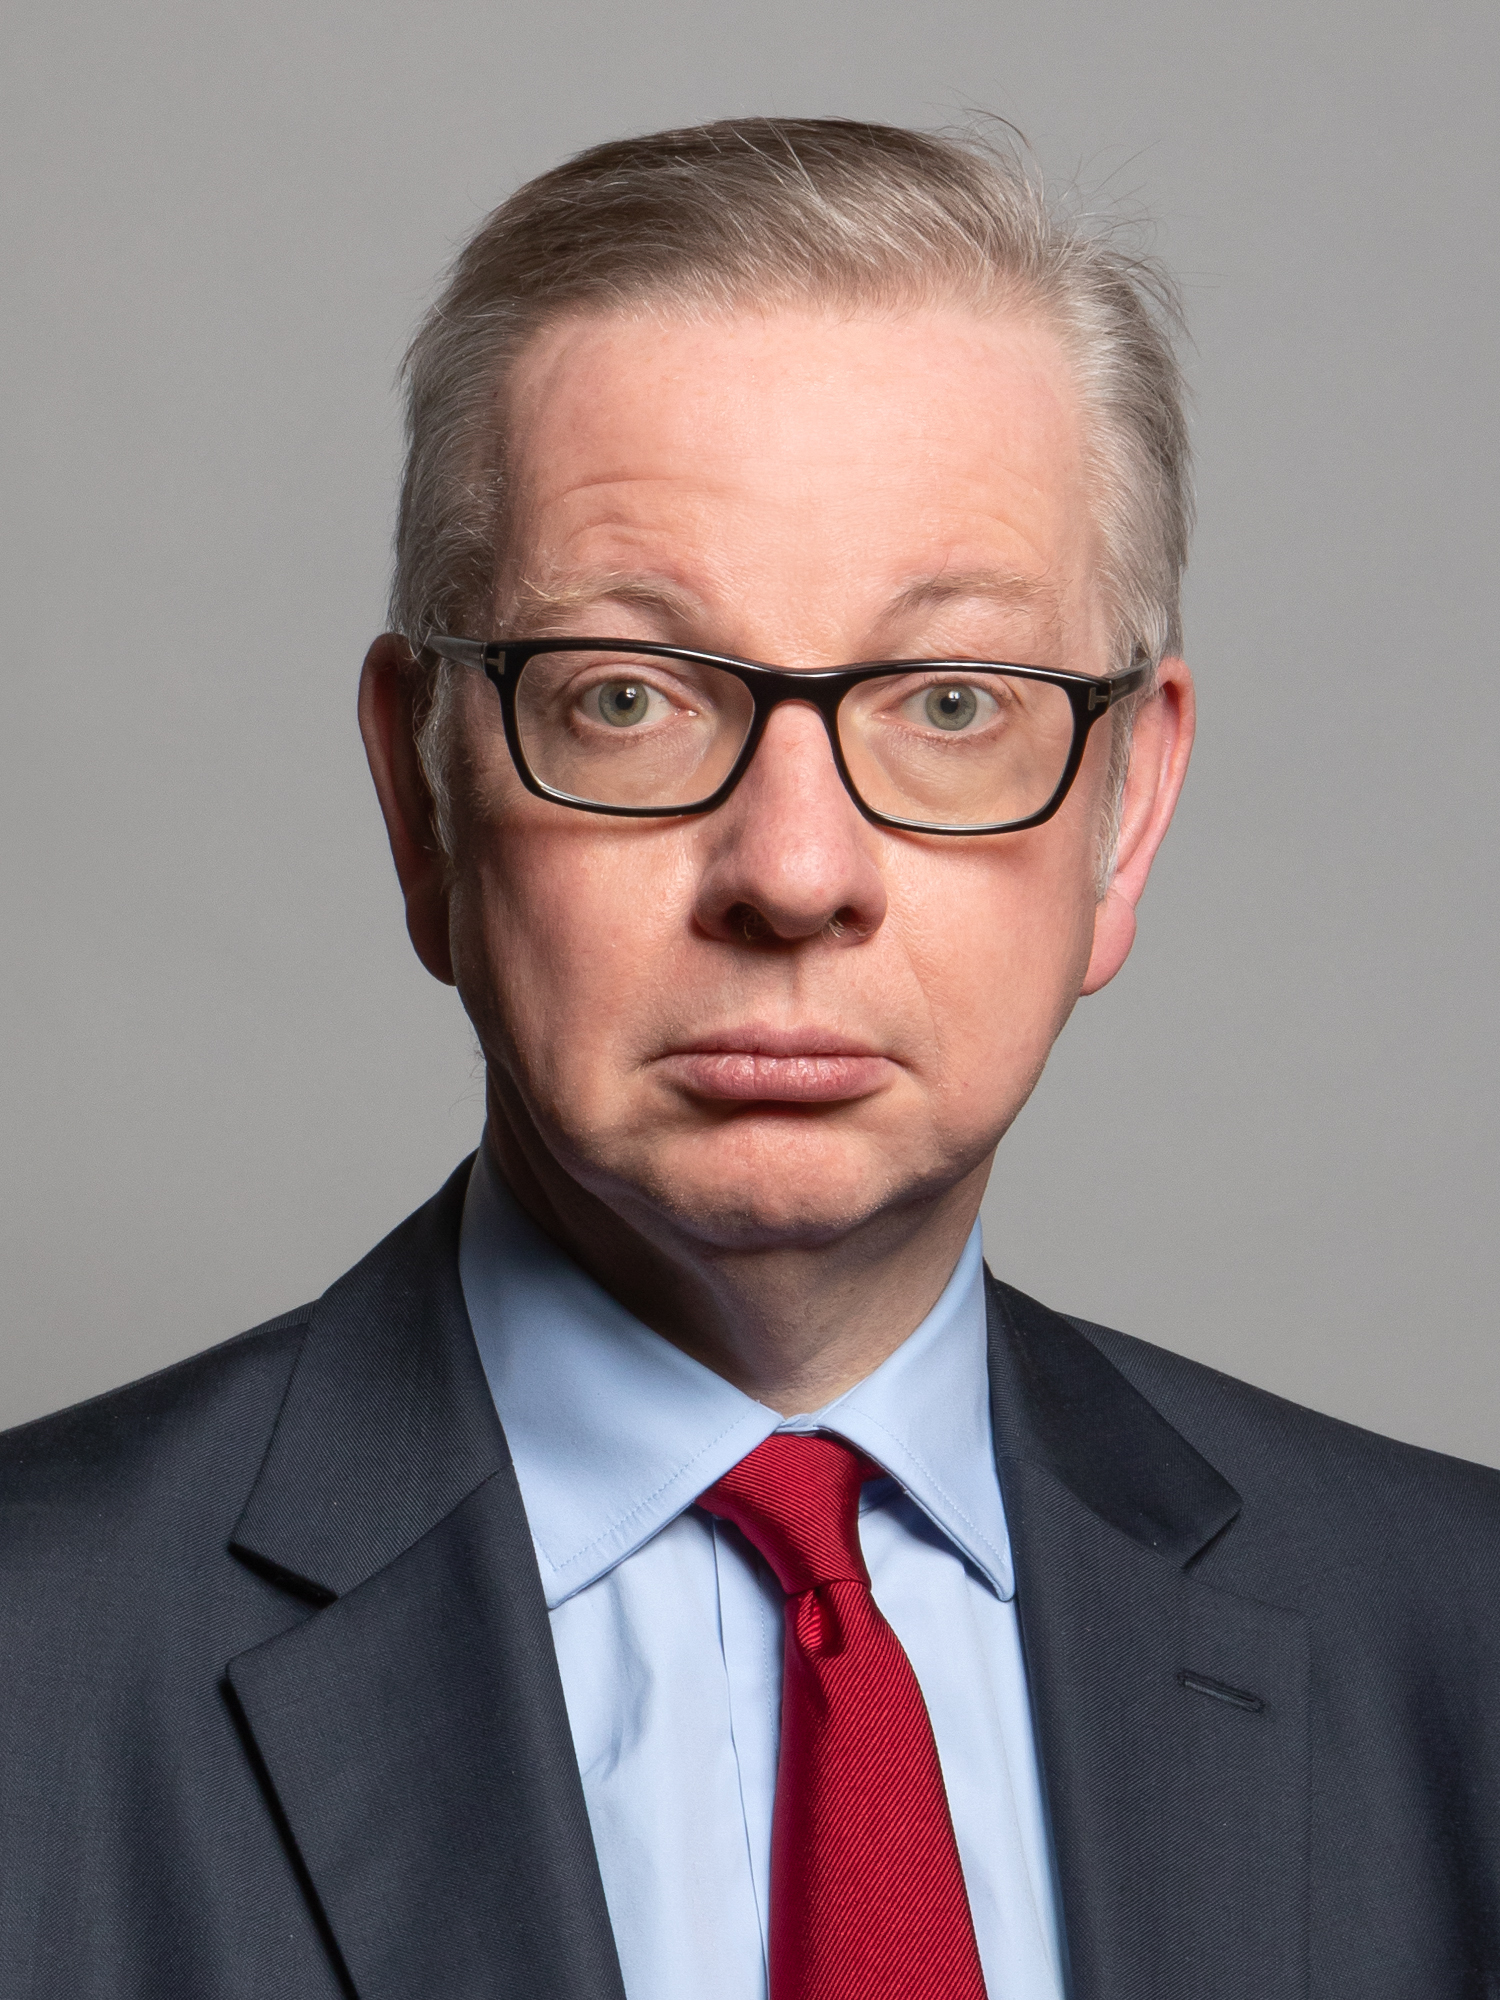 UK will keep talking to EU over N. Ireland, but nothing off the table - Gove